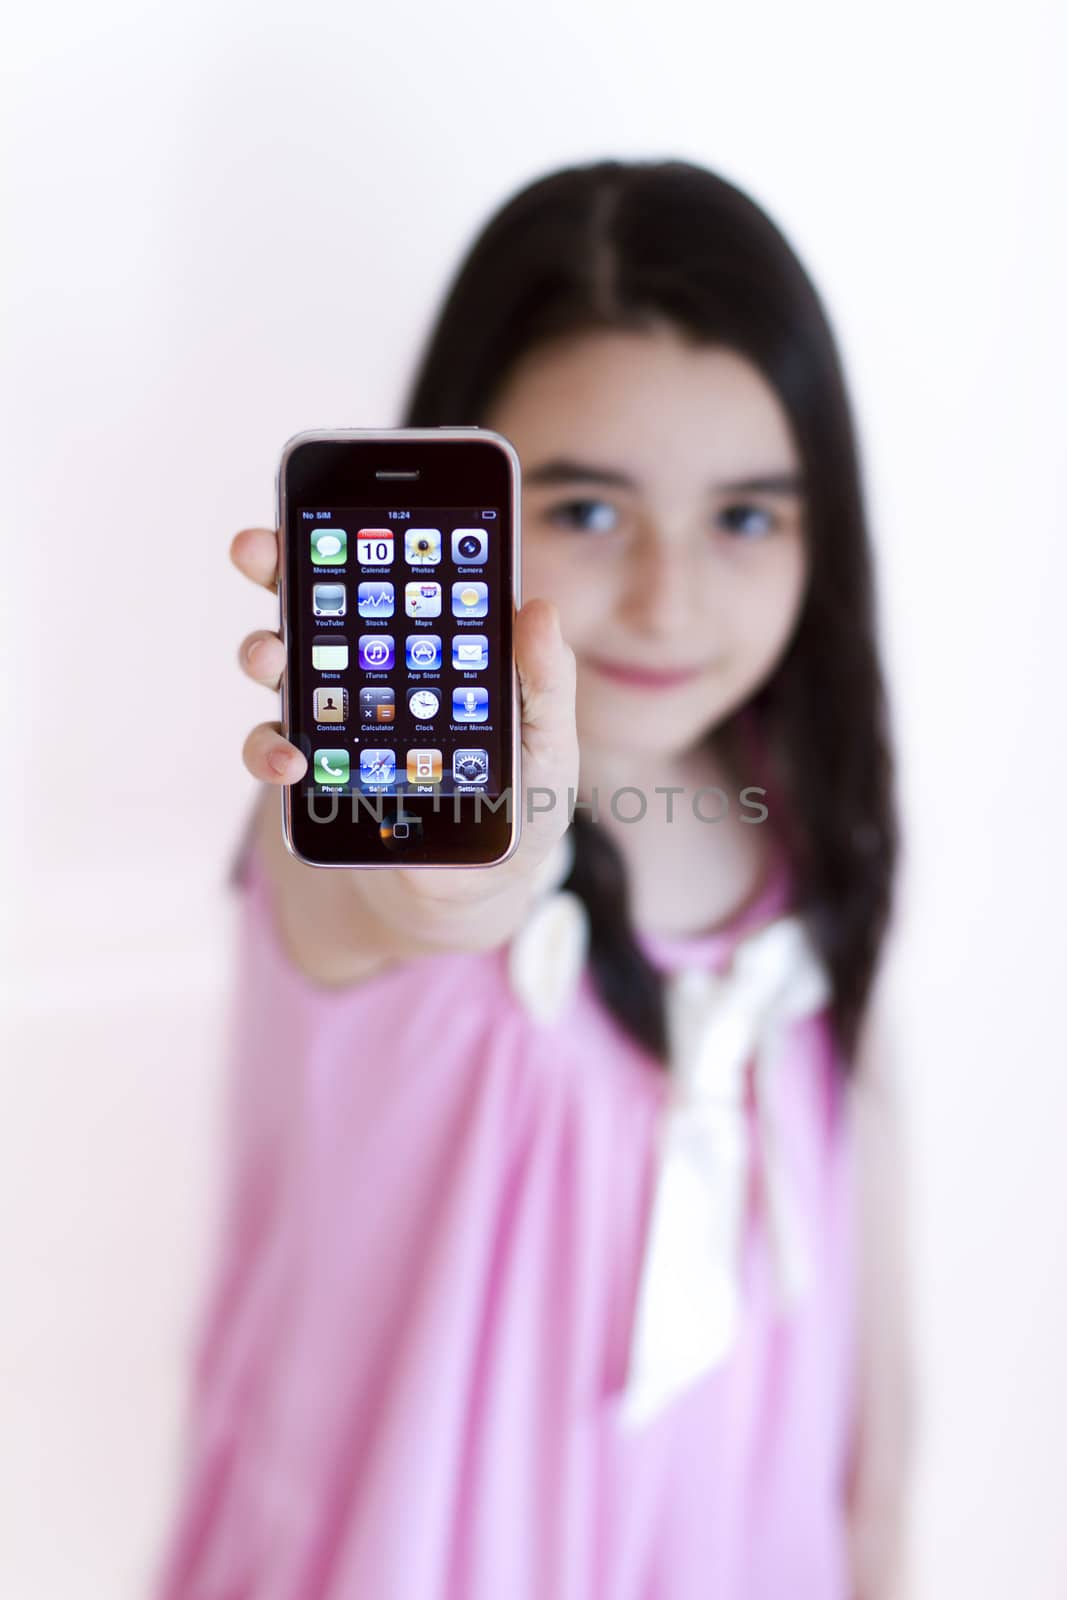 Galati, Romania - April 10, 2011: Apple IPhone 3s, the third generation smart phone displaying the home screen with applications